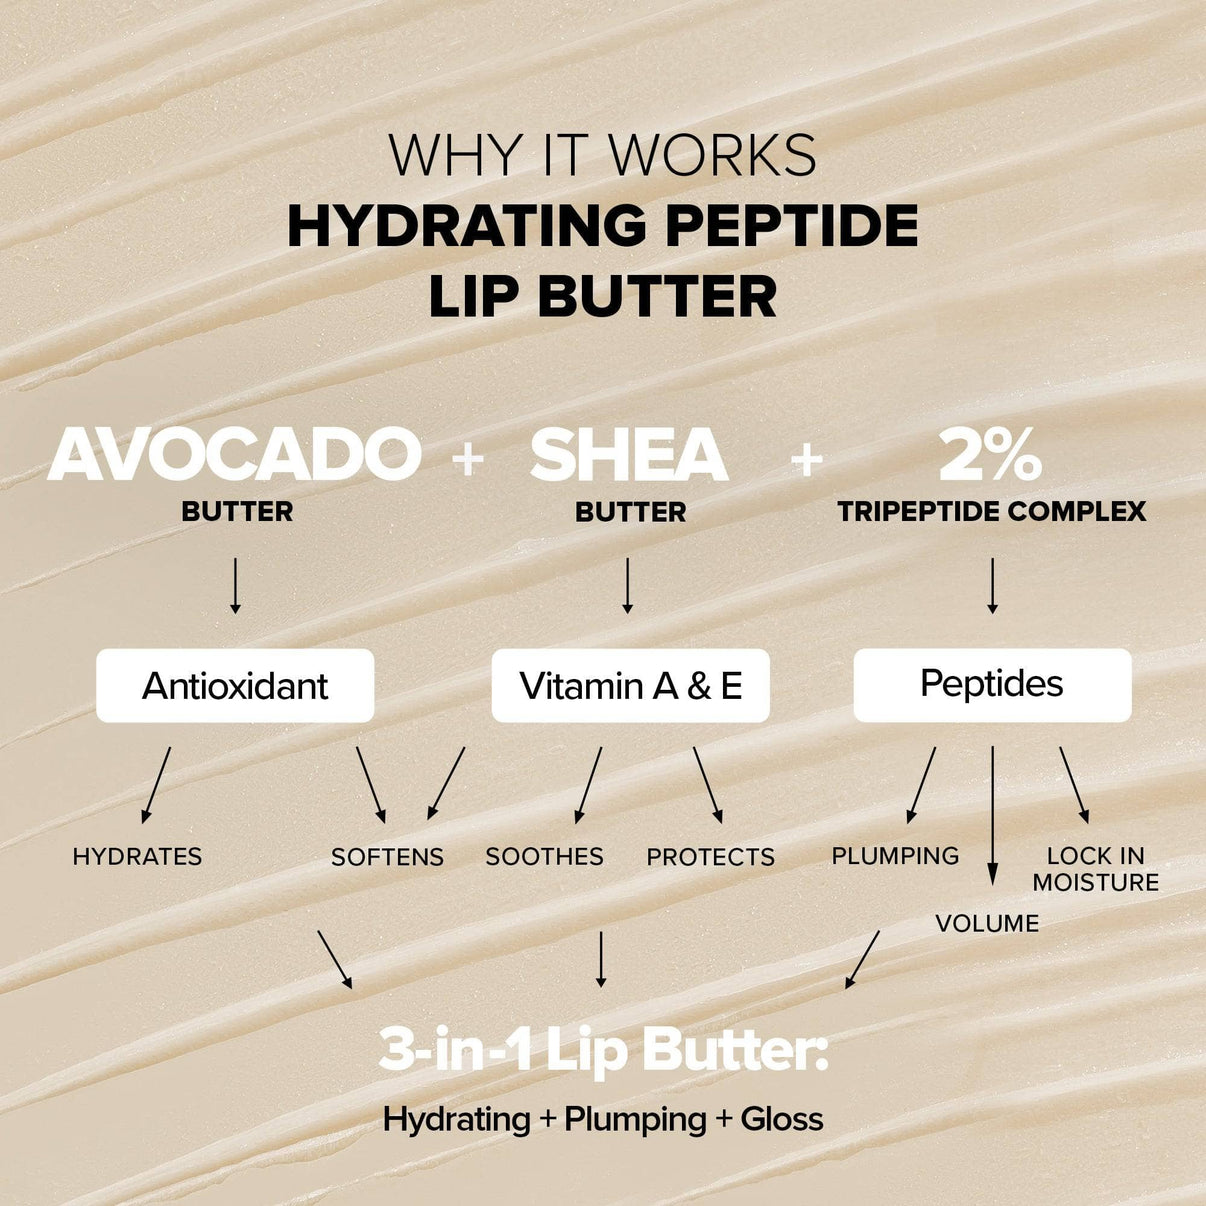 Hydra Peptide Lip Butter 2 Piece Kit, why it works and ingredient descriptions